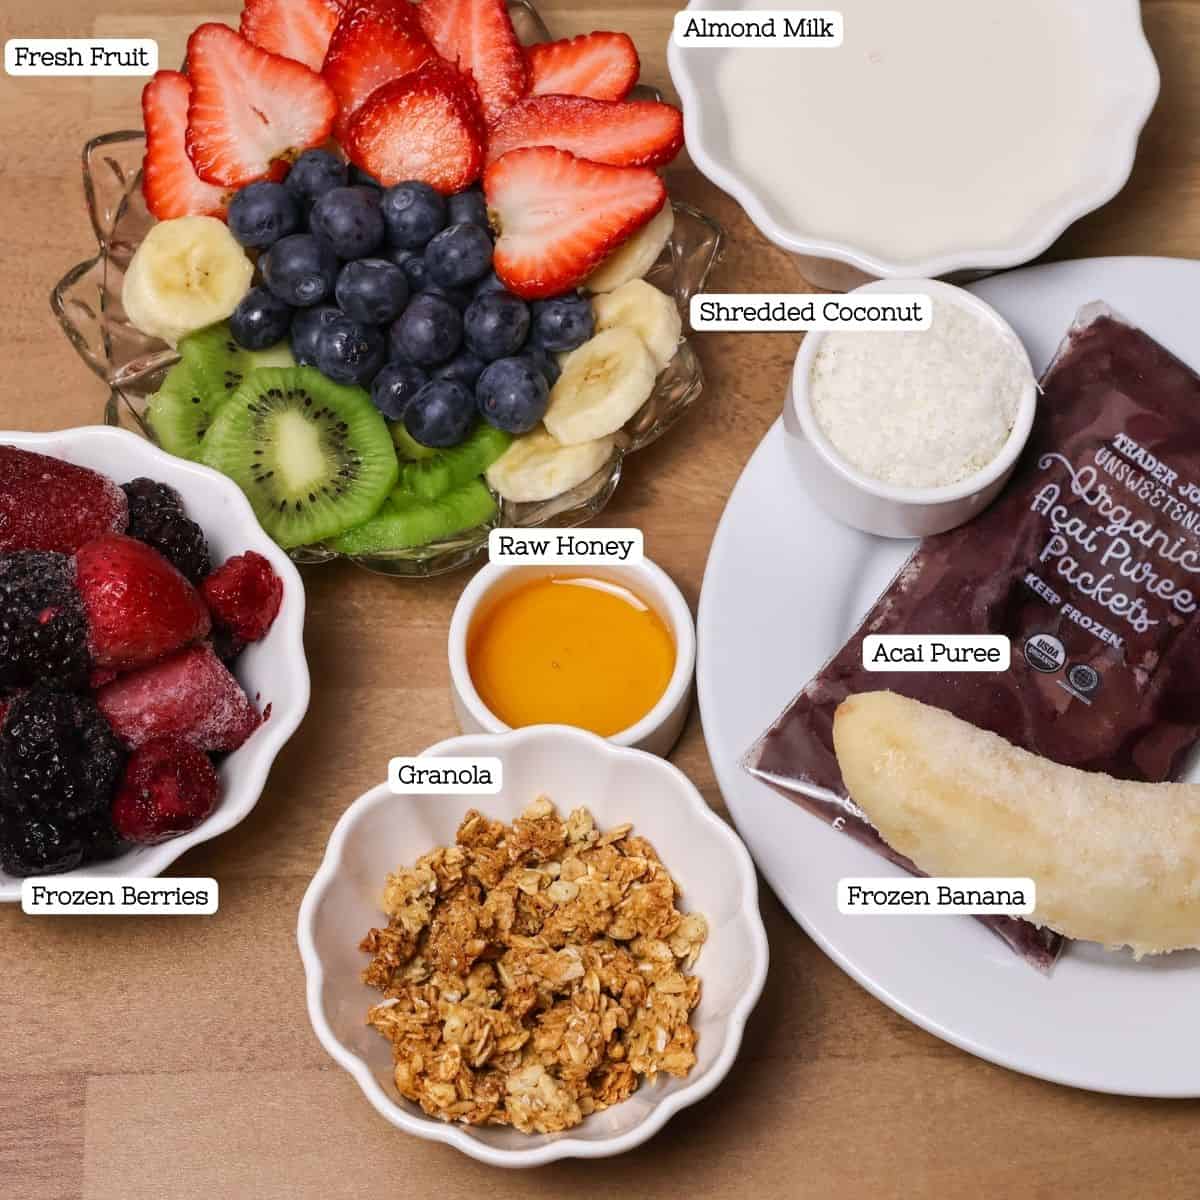 An overhead view of all the Hawaiian açaí bowl ingredients laid out on a table, including açaí puree, frozen berries, almond milk, granola, bananas, kiwi, strawberries, blueberries, shredded coconut, and raw honey.